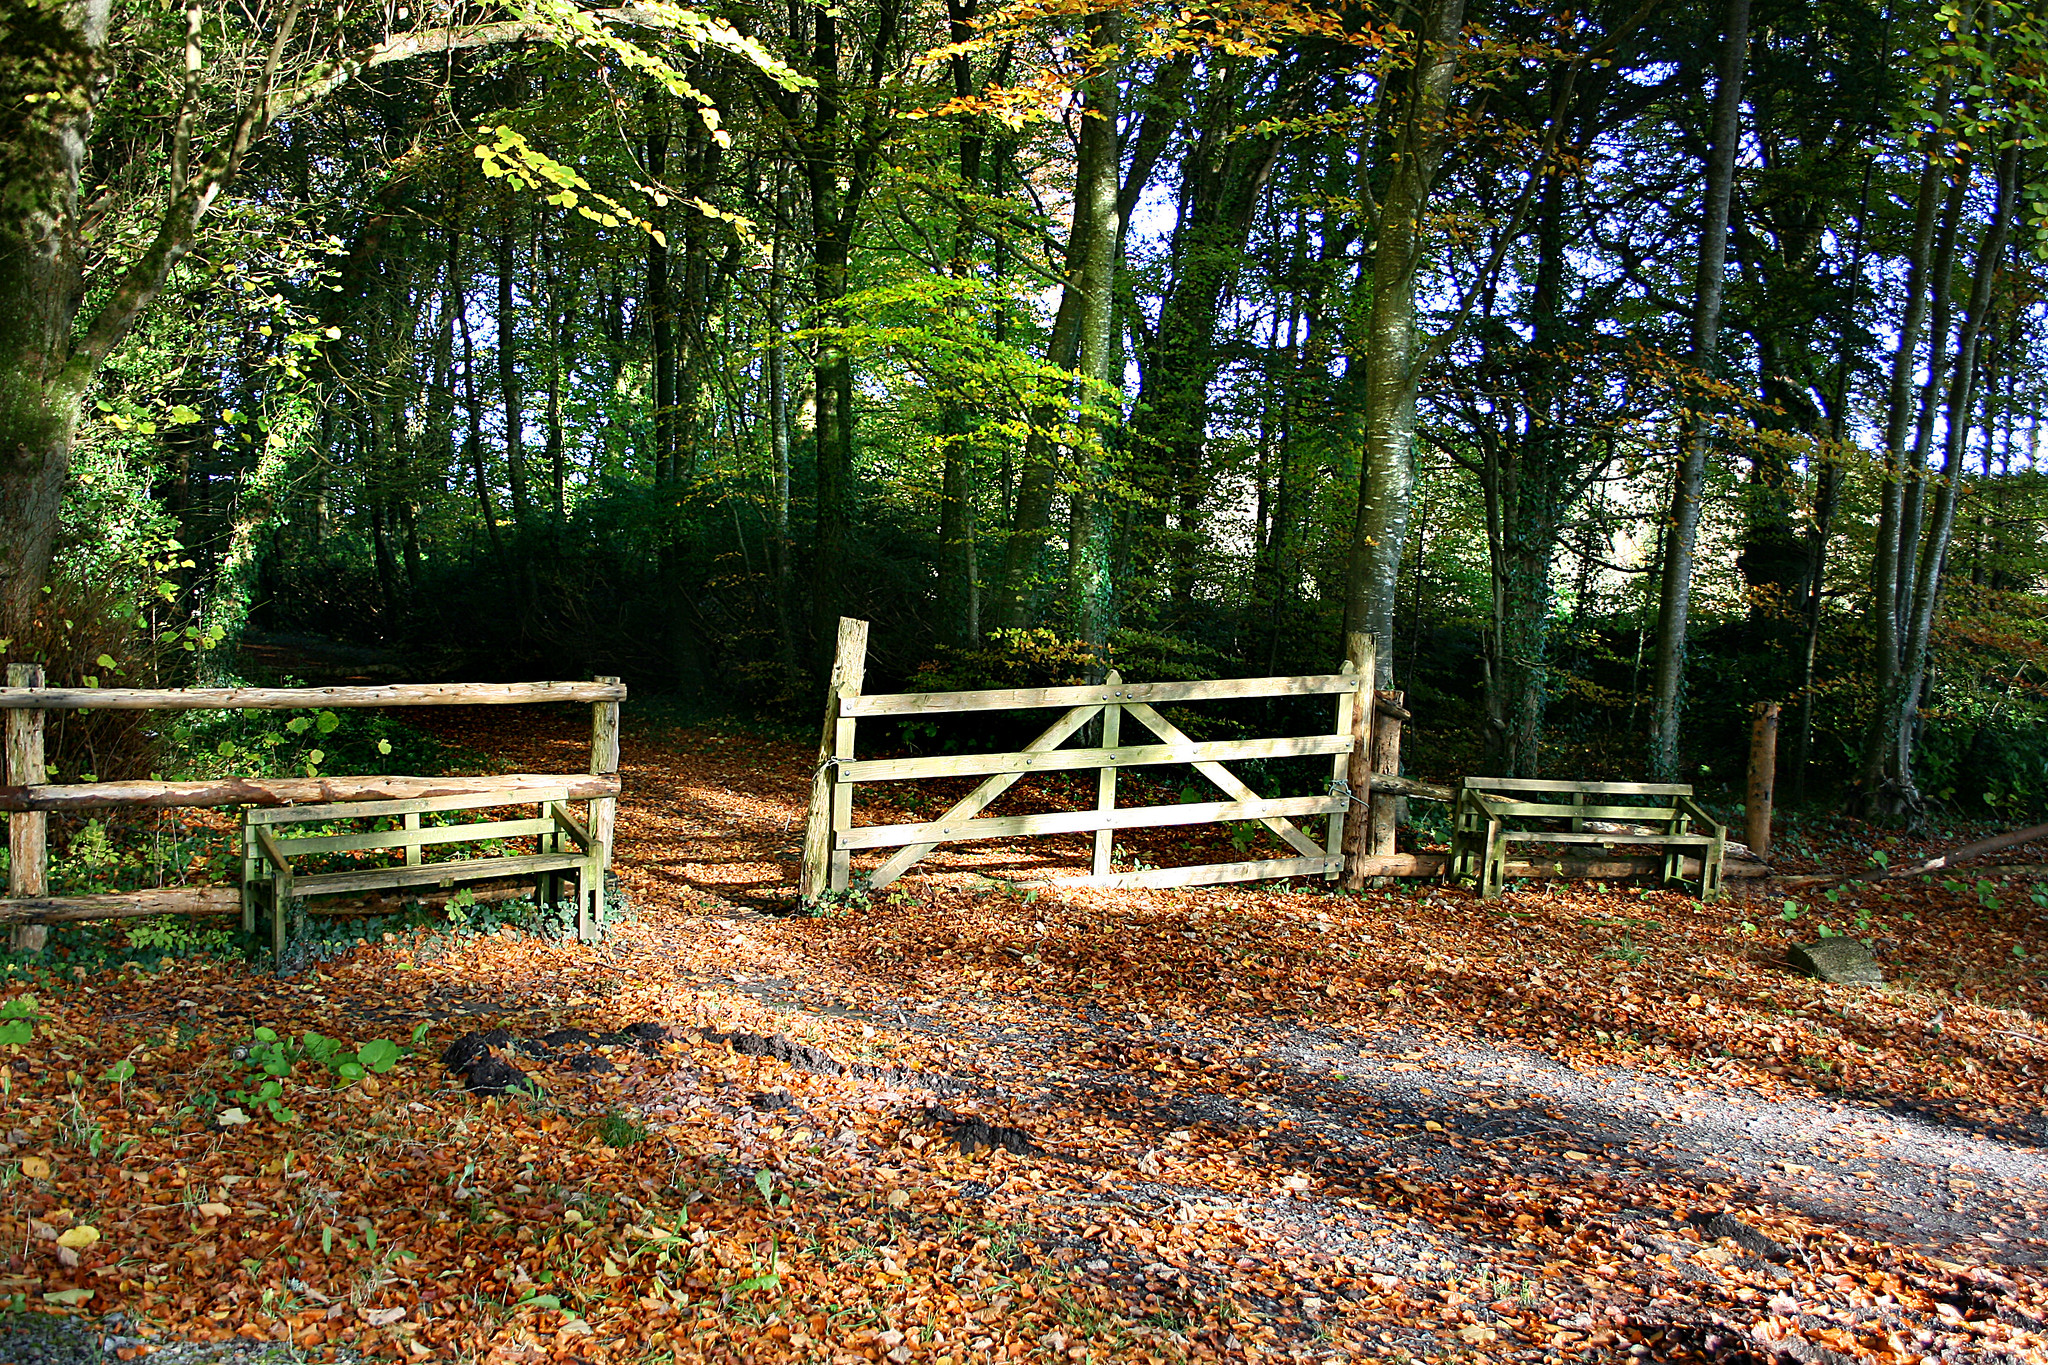 Dried leaves all over the place and wooden fence below trees at the entrance of Kilcornan Woodland in Galway, named as one of the best hikes in Ireland